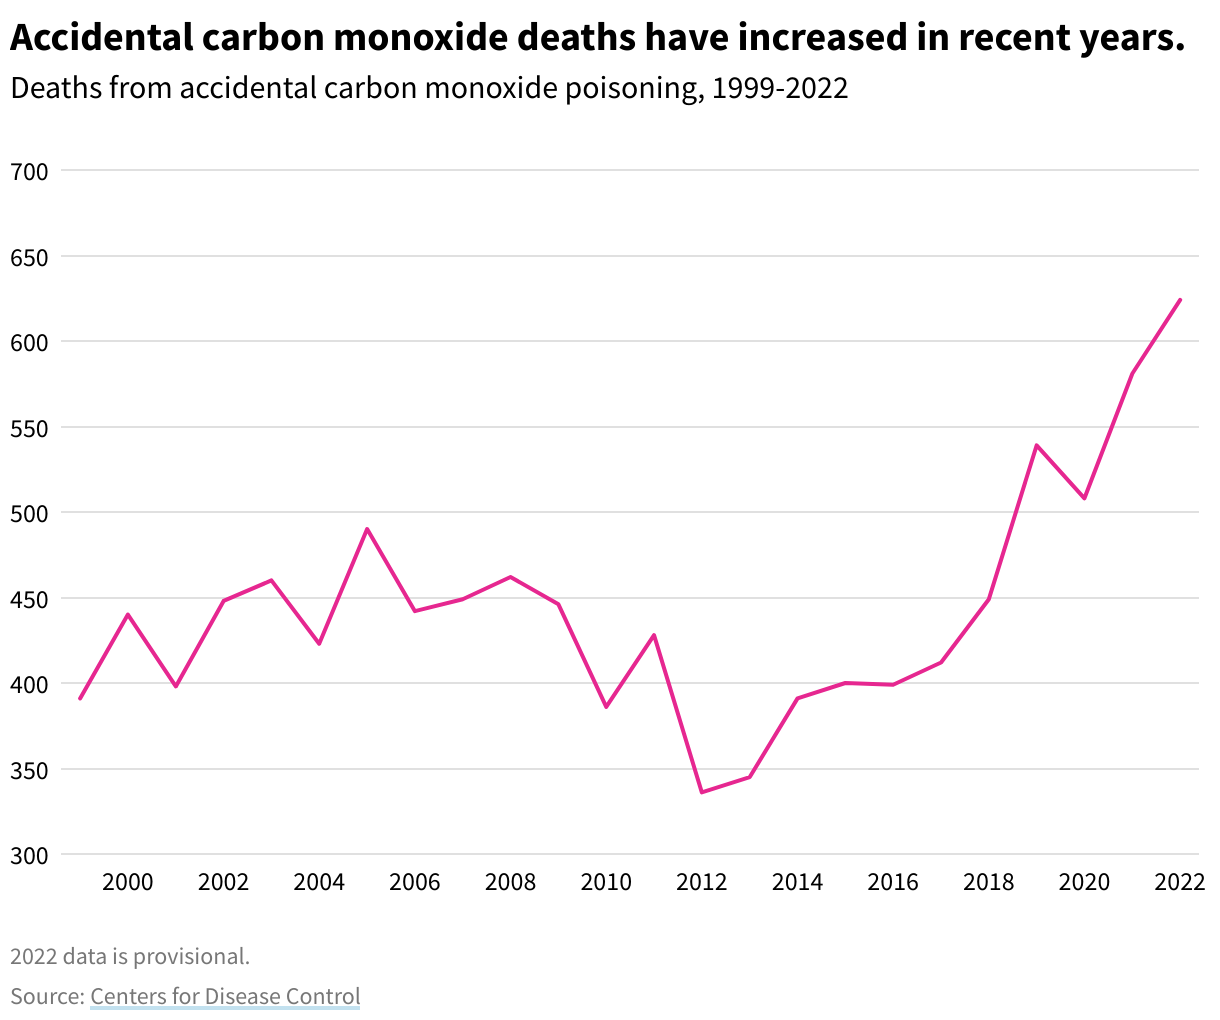 Line chart showing carbon monoxide deaths hovering around 400-450 from 1999-2010, dropping to 336 in 2012, and then increasing over time to 624 in 2022.